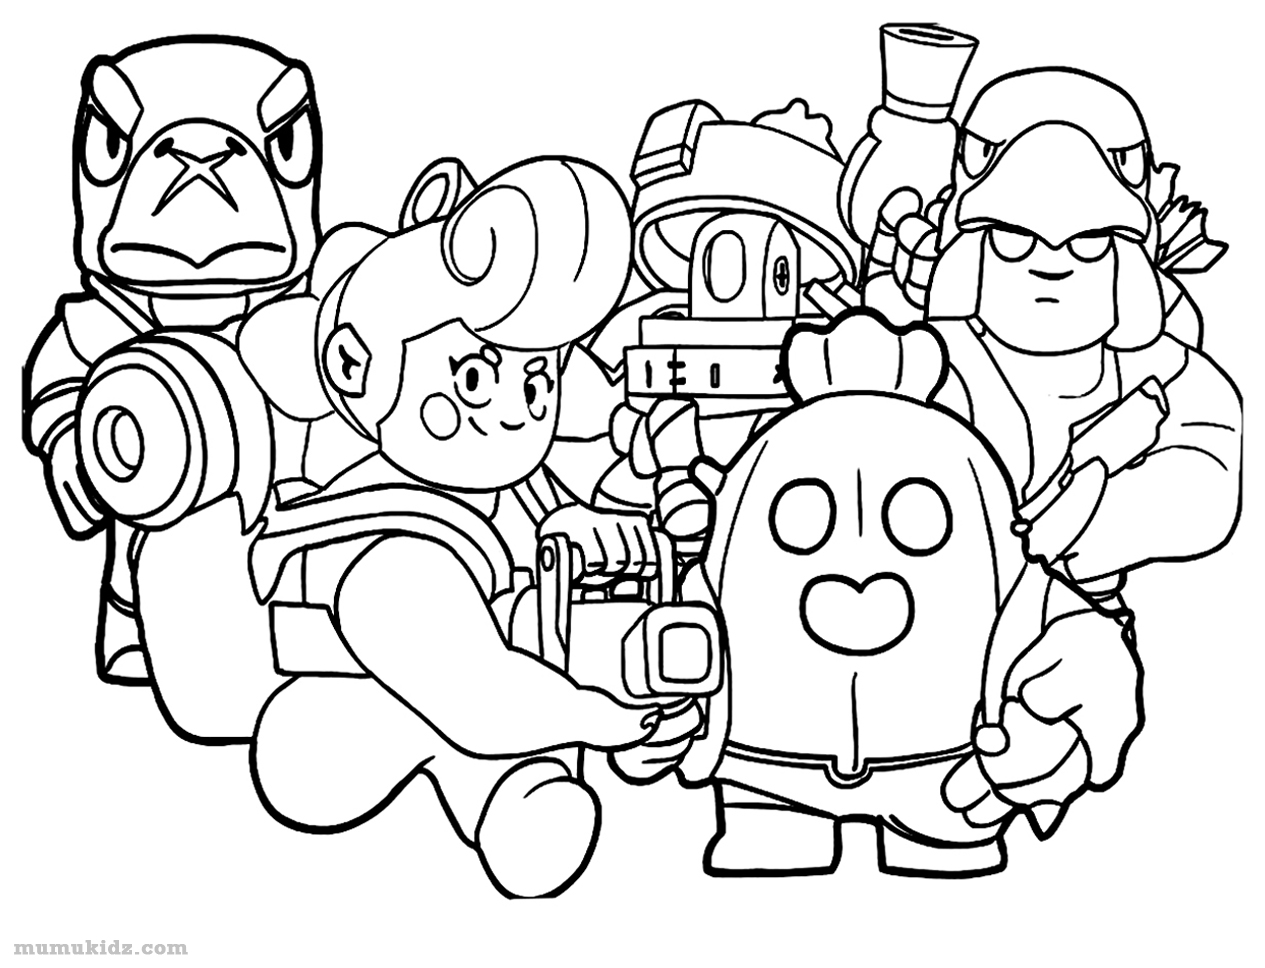 Brawl Stars Coloring Pages 1856